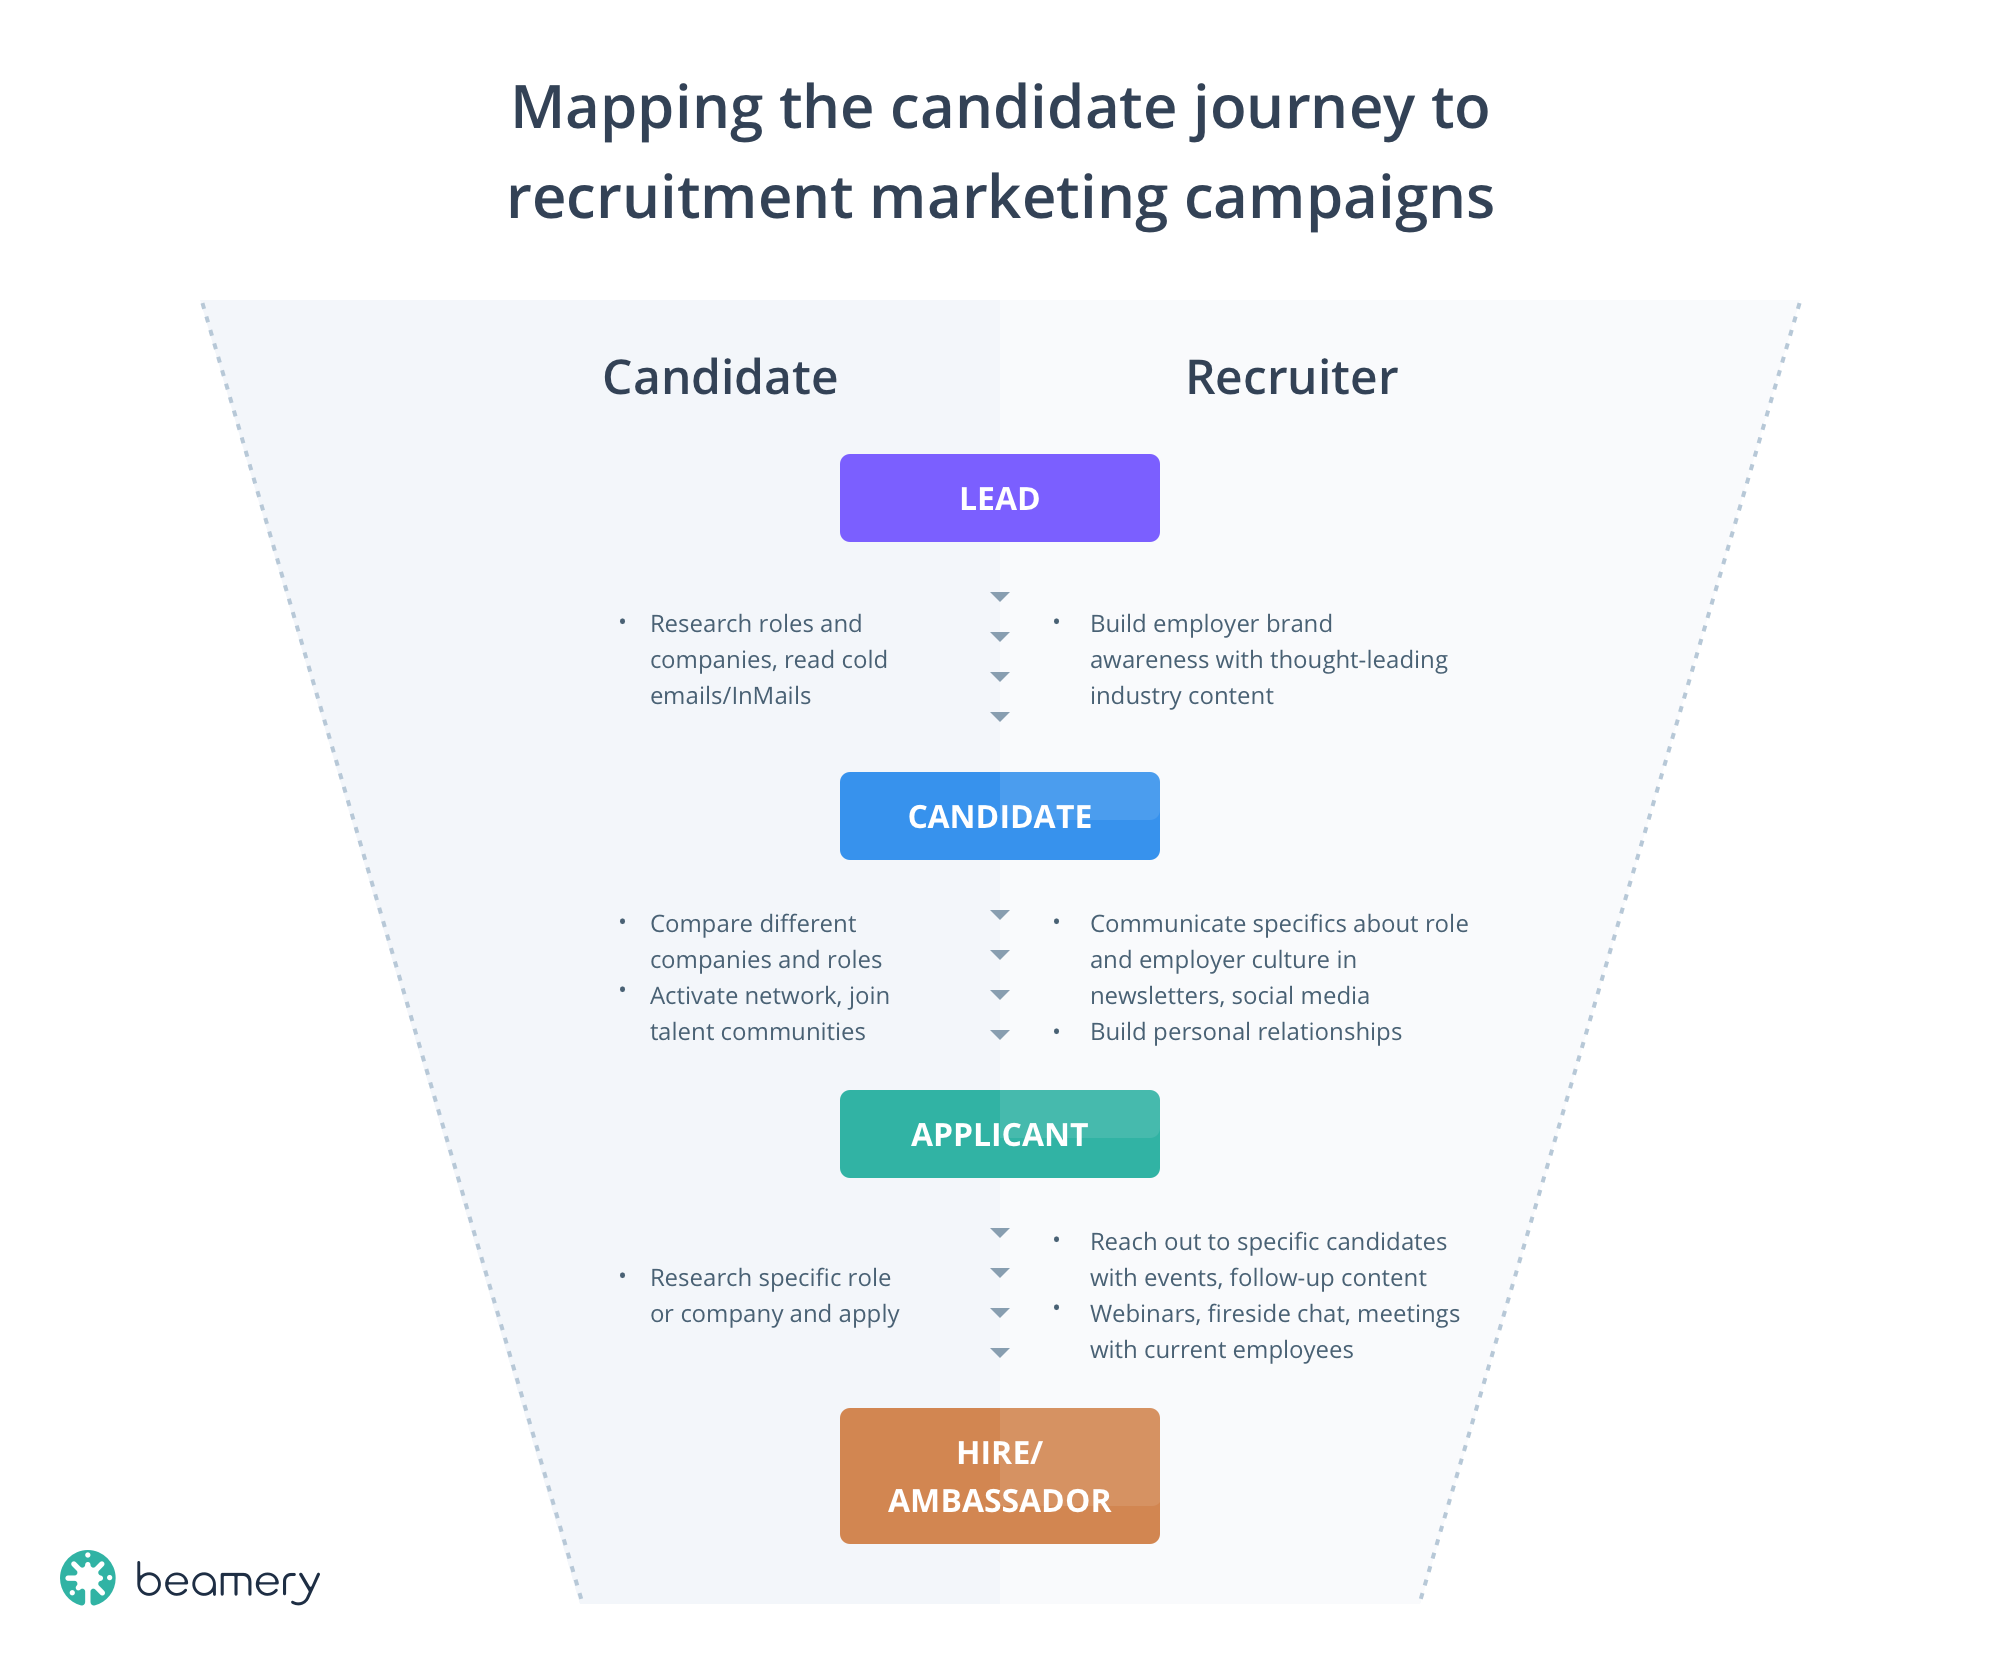 Mapping the candidate journey to recruitment marketing campaigns